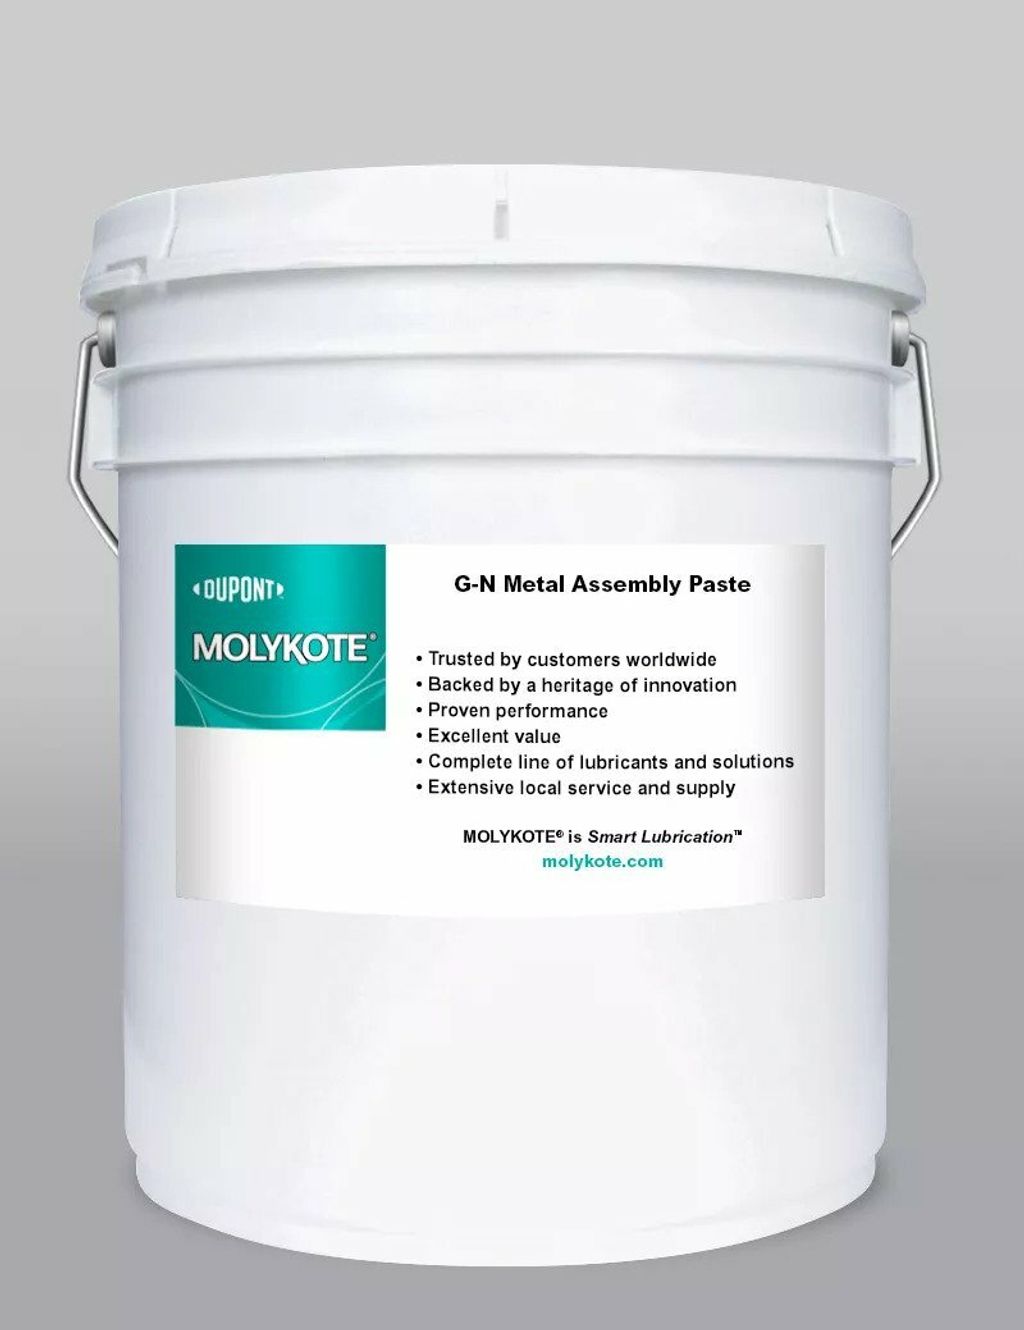 MOLYKOTE® G-N Metal Assembly Paste